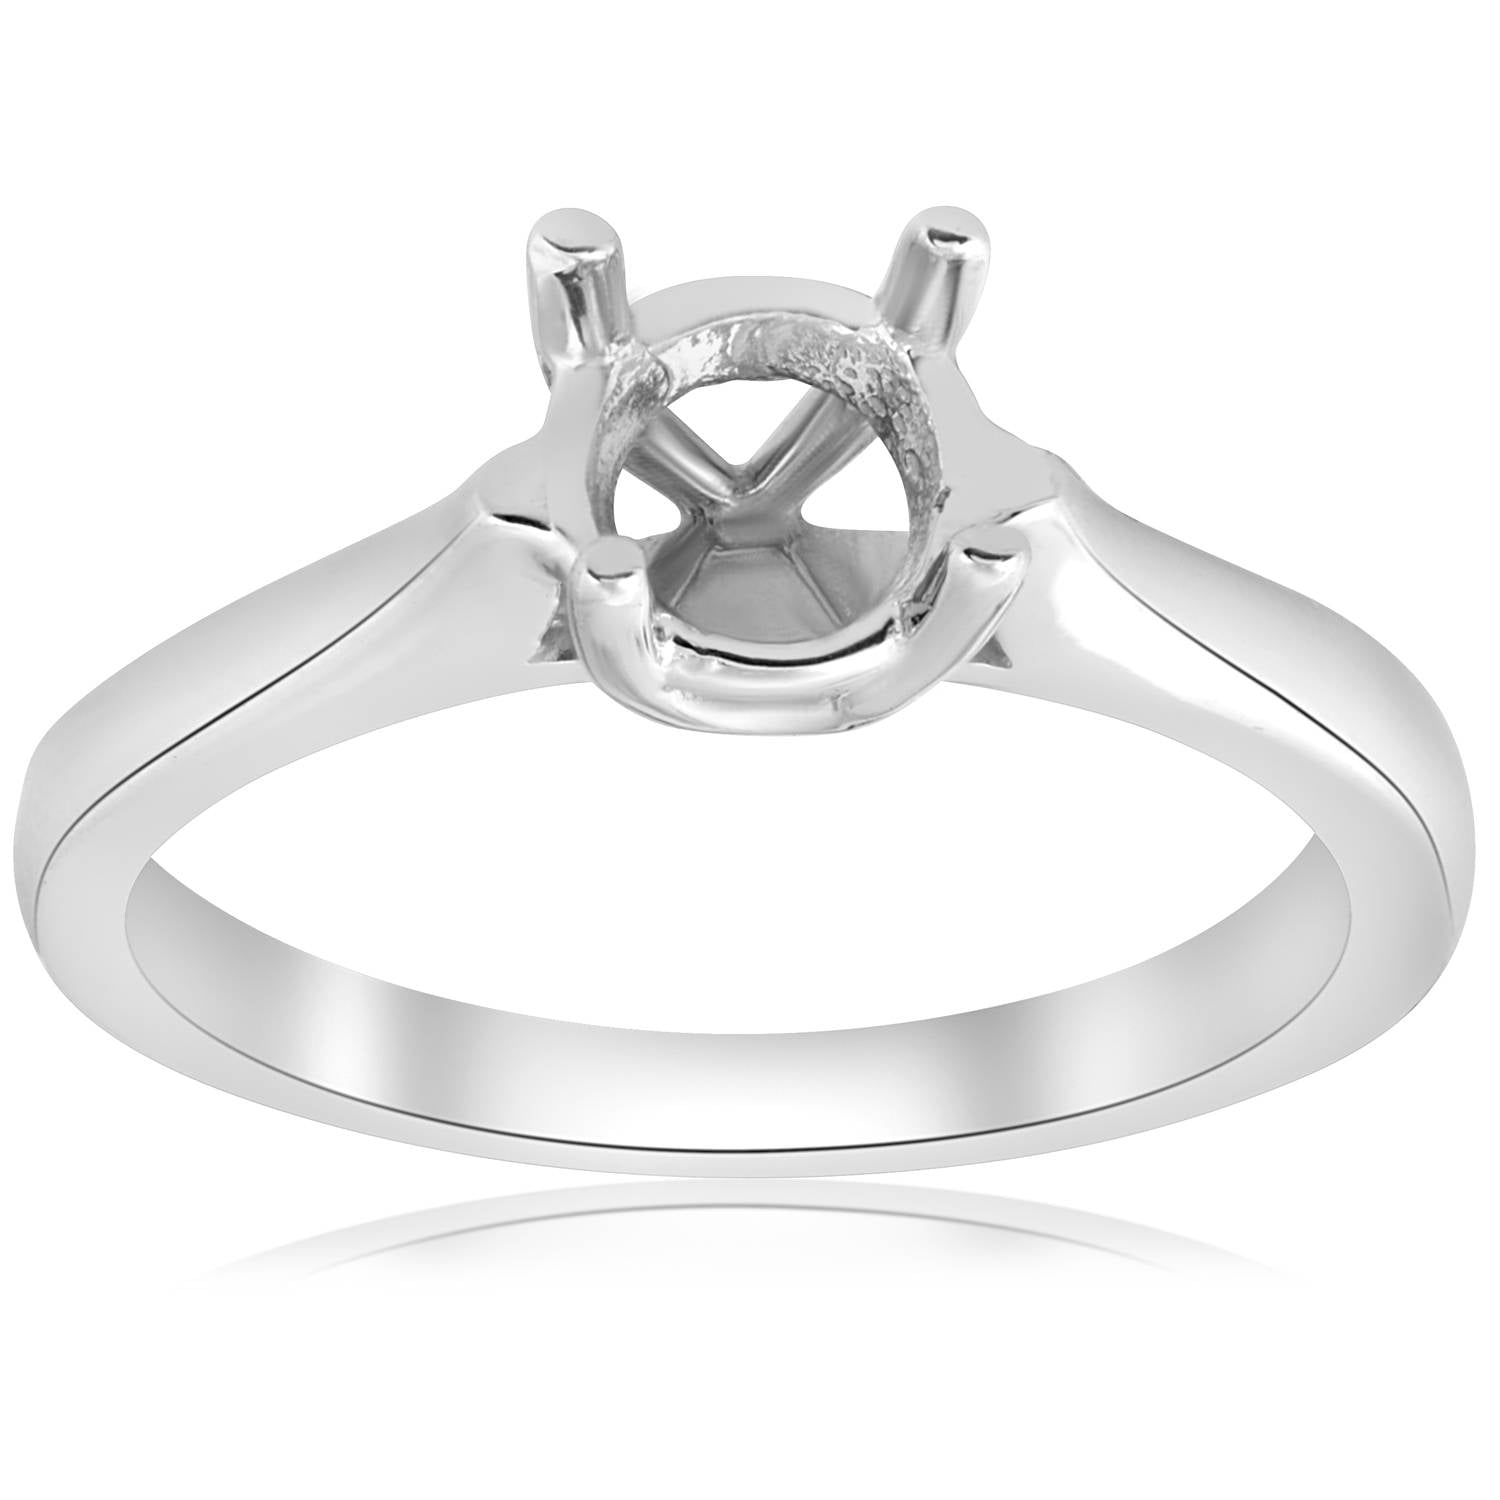 9MM ROUND CUT SILVER 925 CATHEDRAL SOLITAIRE SETTING SEMI MOUNT ENGAGEMENT RING 